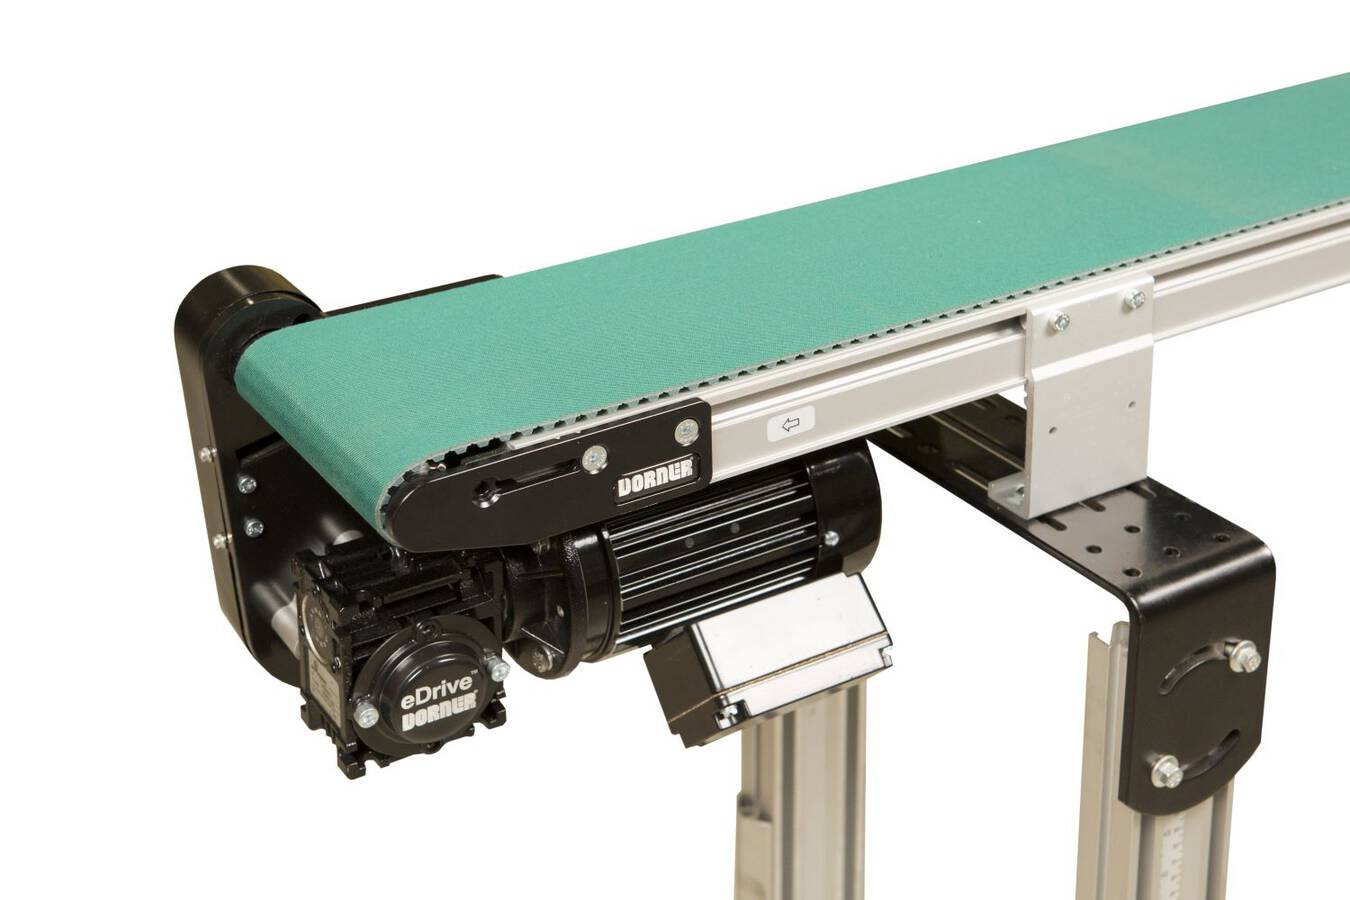 Precision Move conveyor for precise timing from Dorner Dorner engineers conveyor systems with precise timing for COBOT applications. 